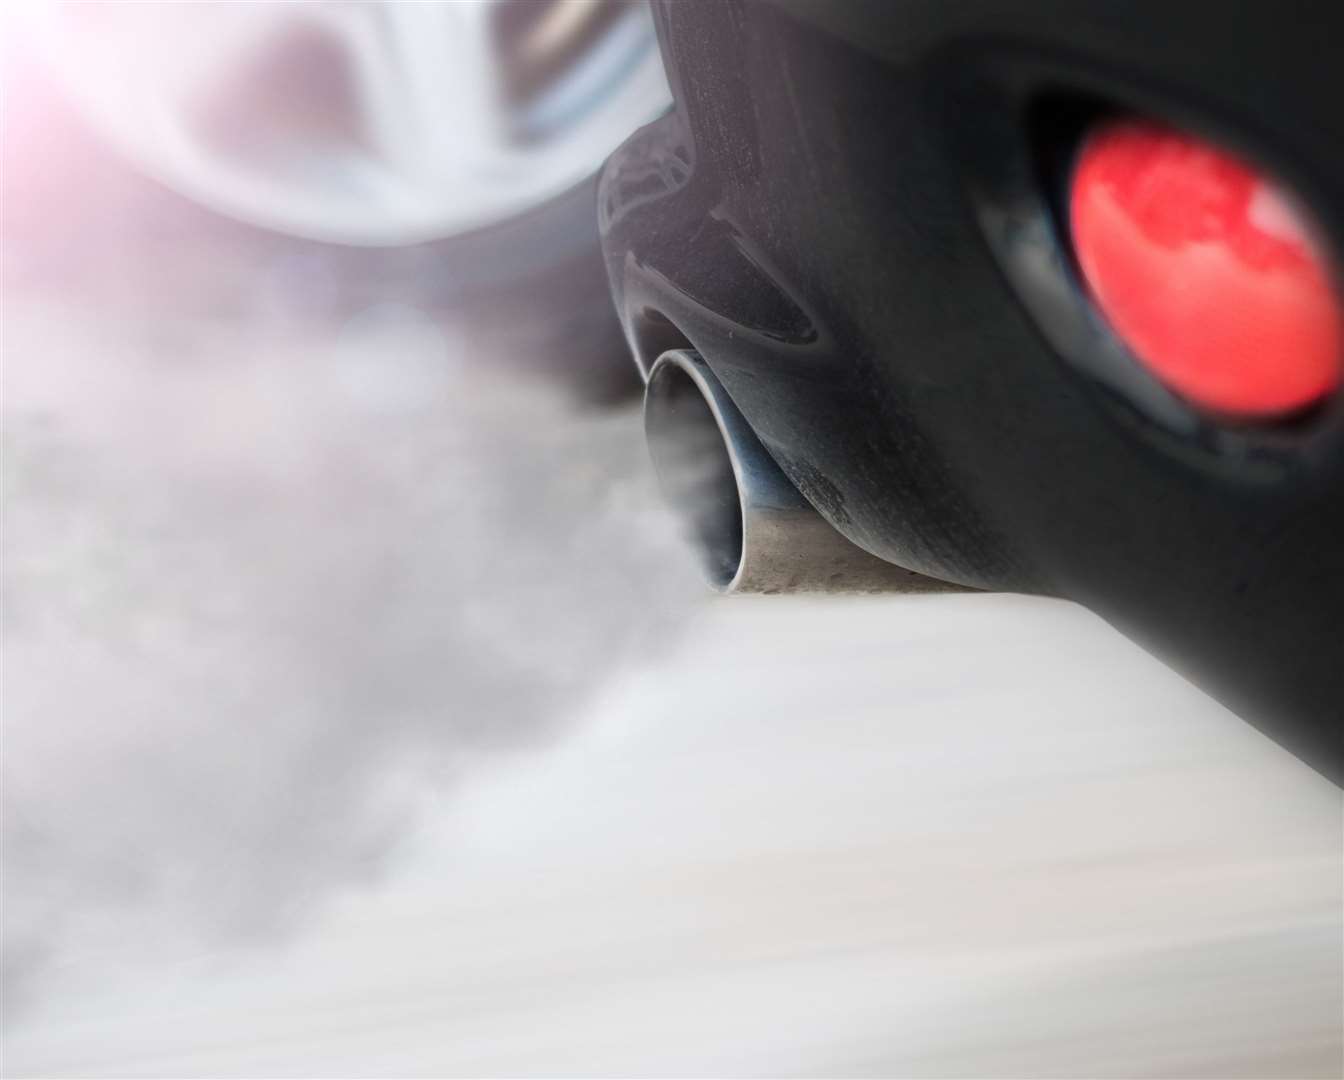 Leaving your engine on while not using a vehicle can pump out up to 20 times more of some pollutants than travelling at 32mph